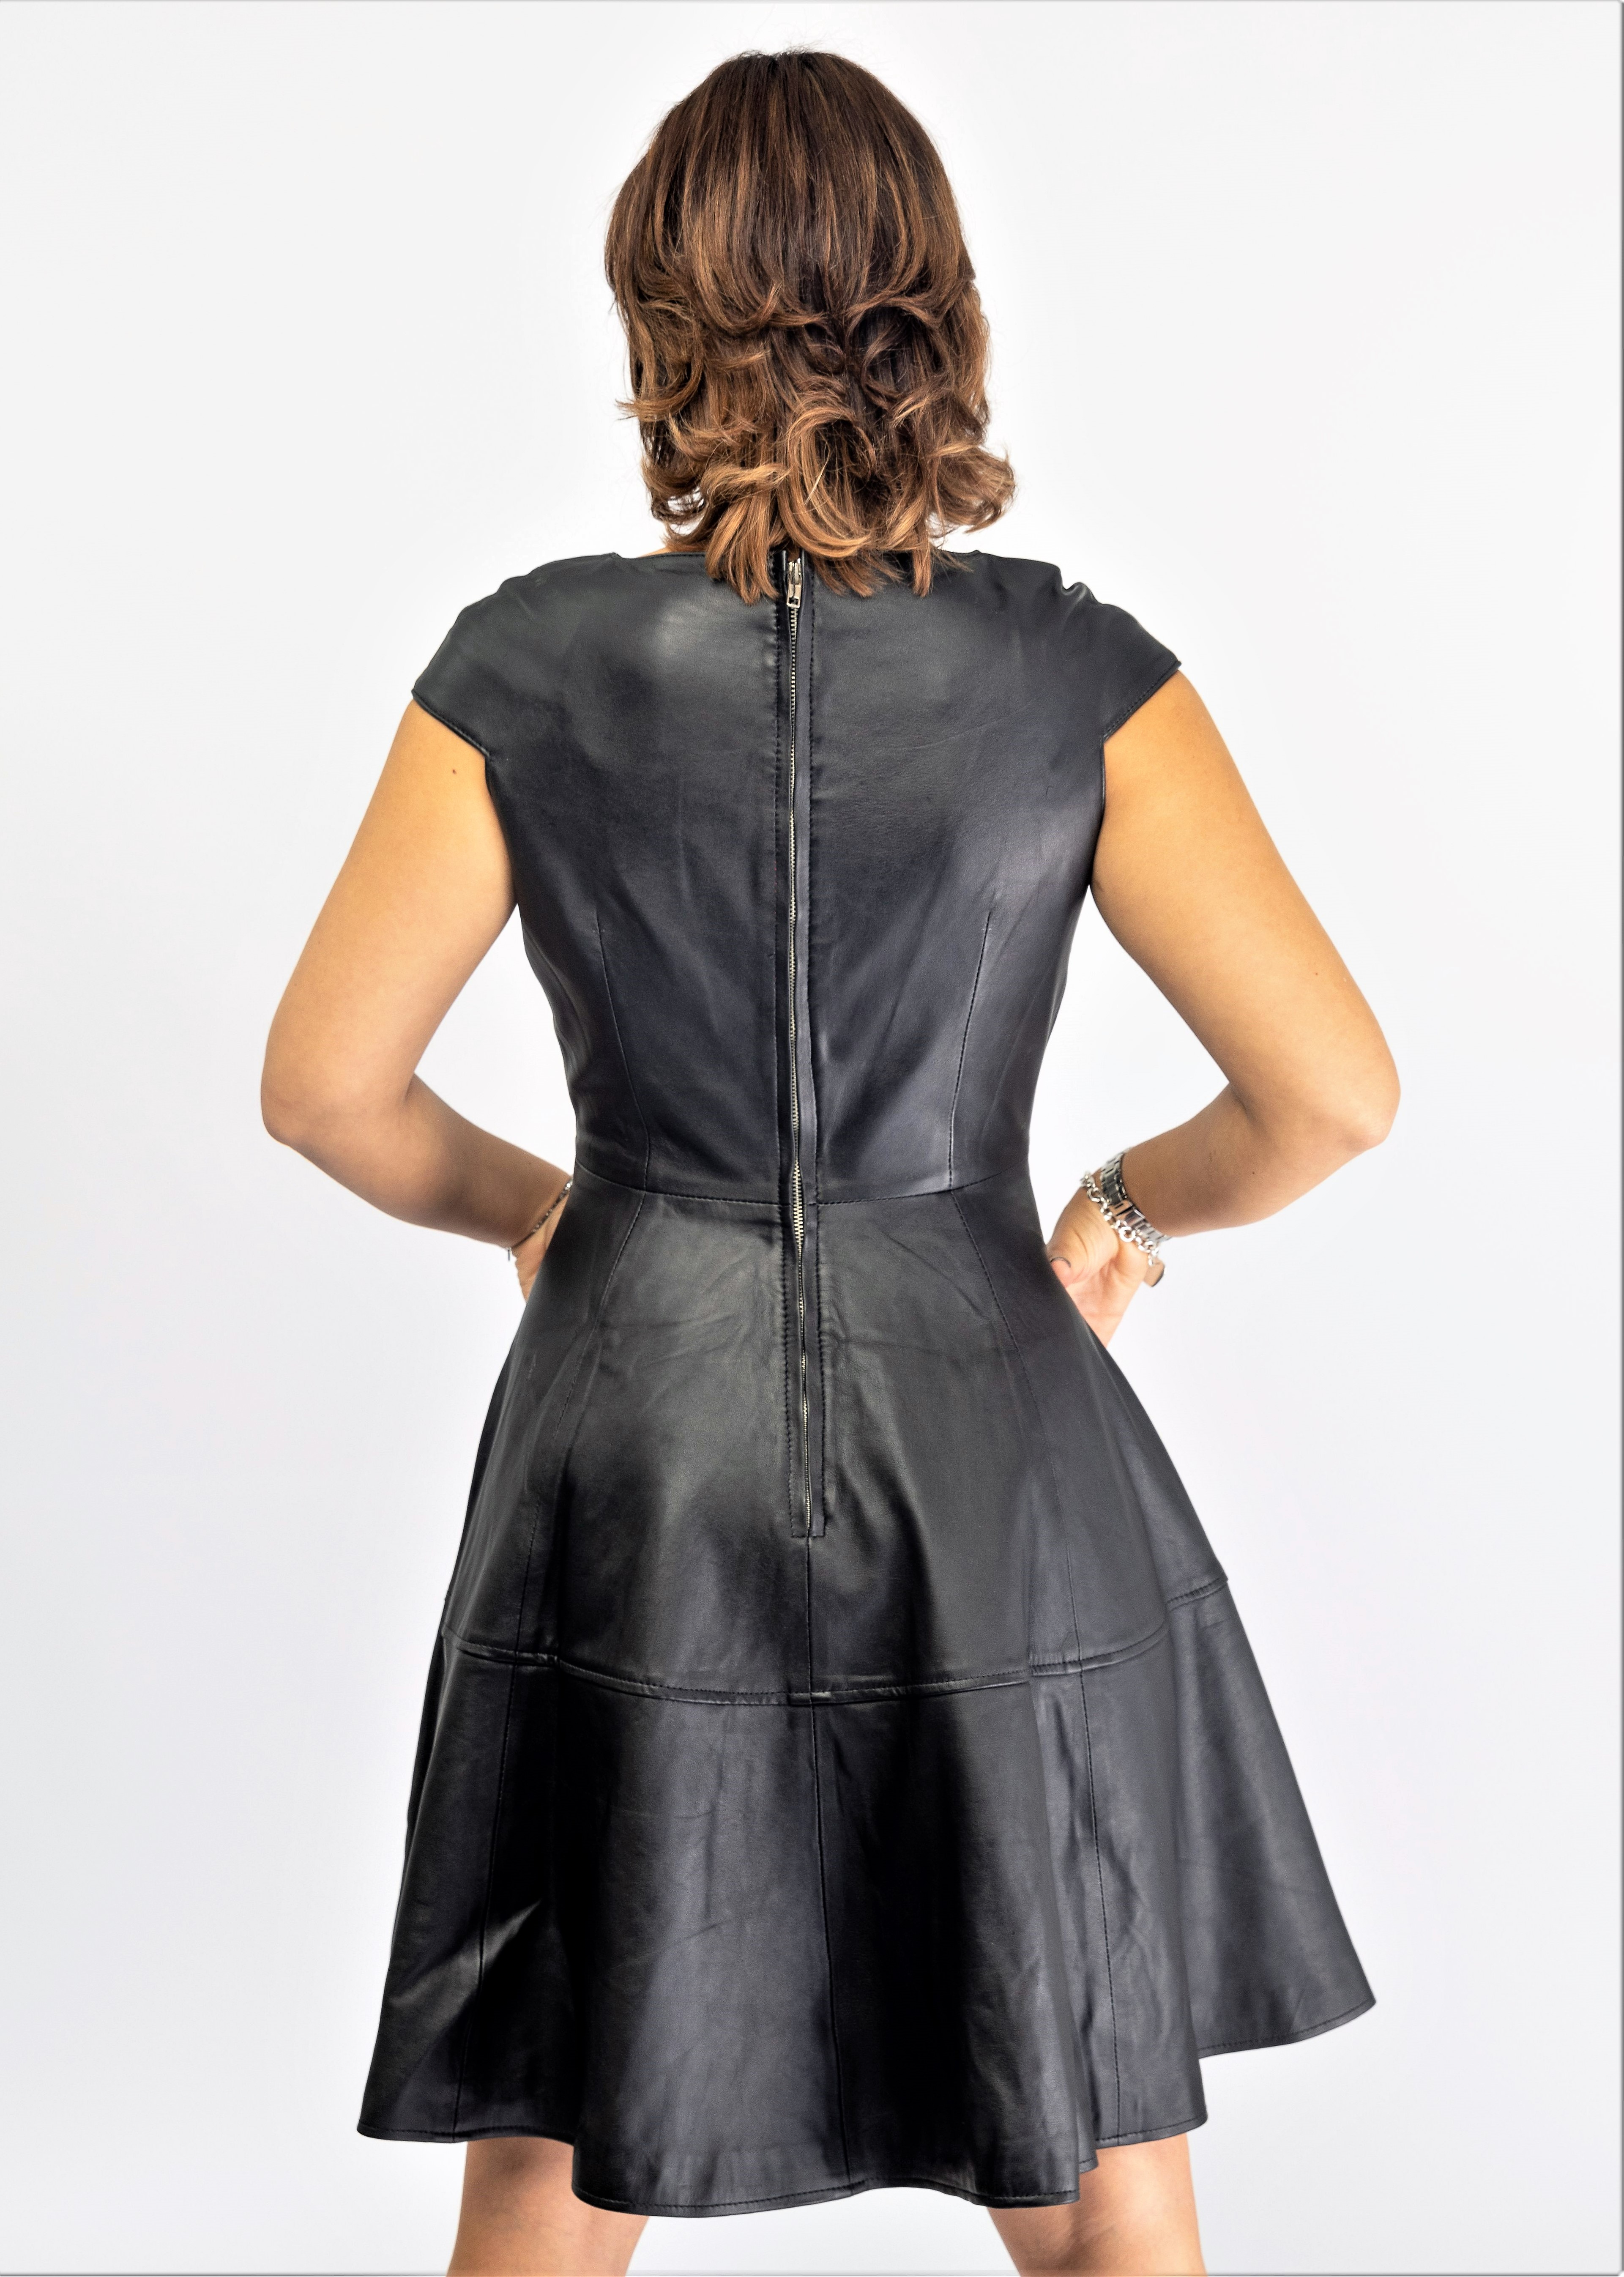 A-Style Leather Dress in GENUINE Leather in black - Merano-